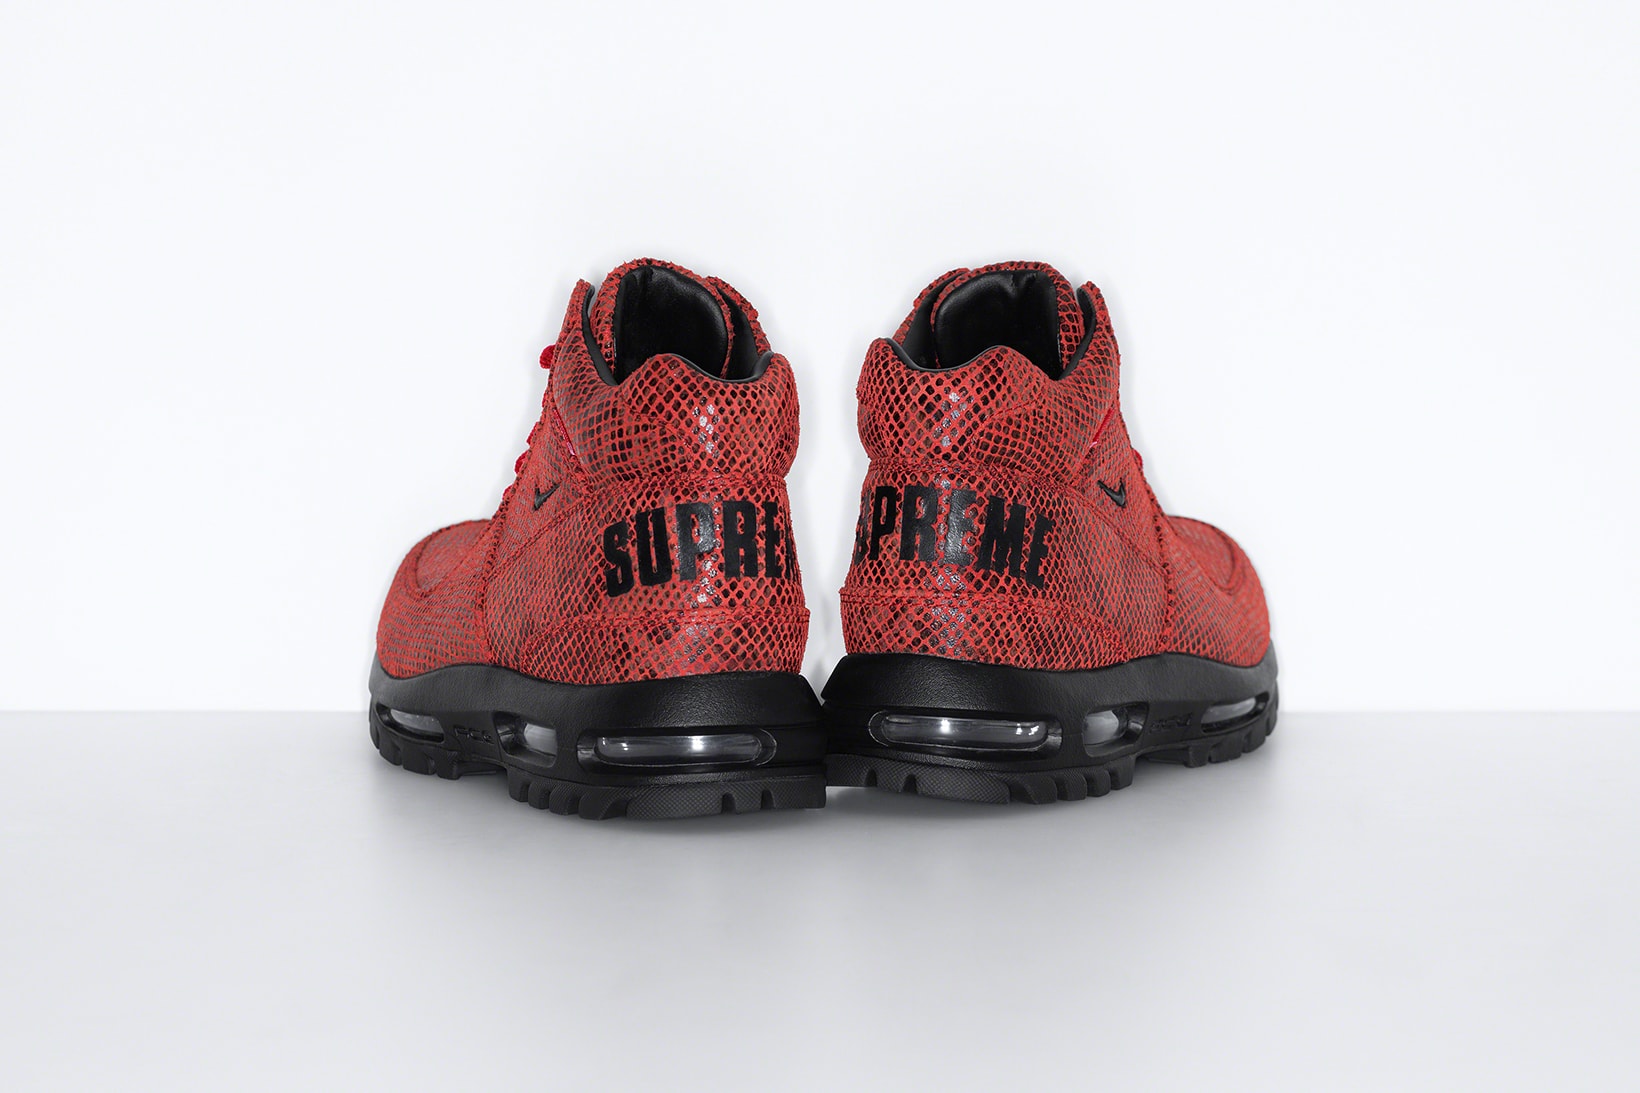 supreme nike goadome collaboration boots footwear shoes snakeskin red colorway black heel